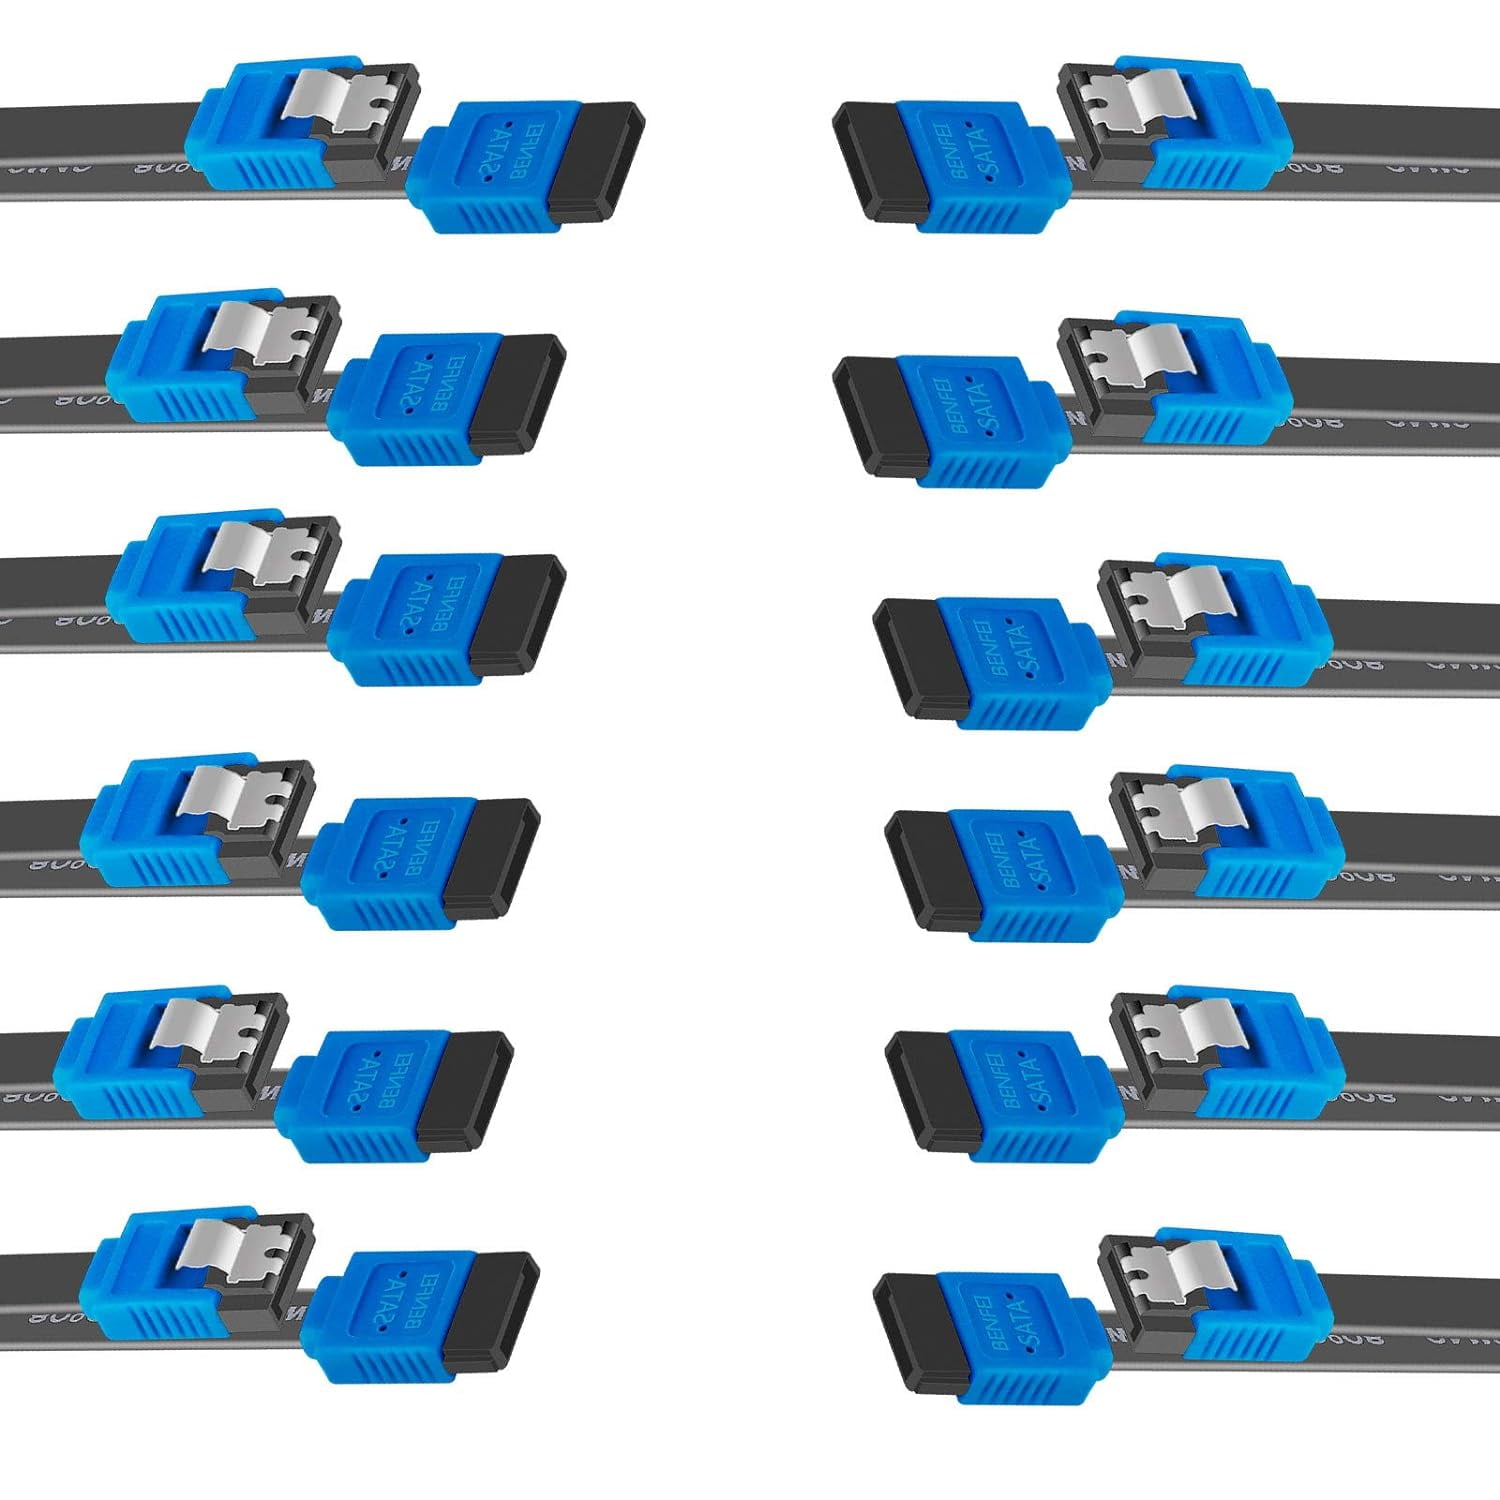 SATA 6 Gb/s cable for desktop SSD installs, CT6GBS3CABLE